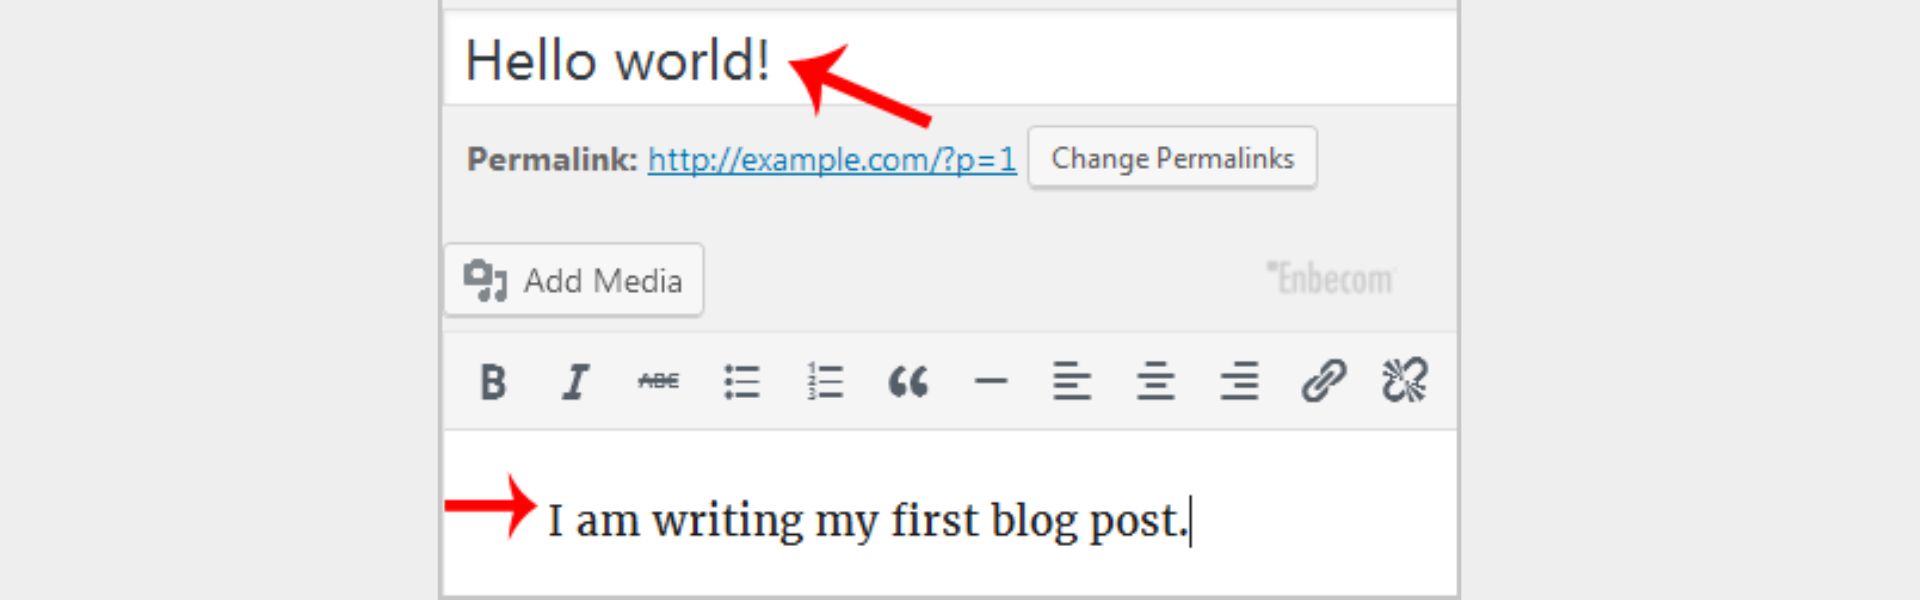 Create your first blog post